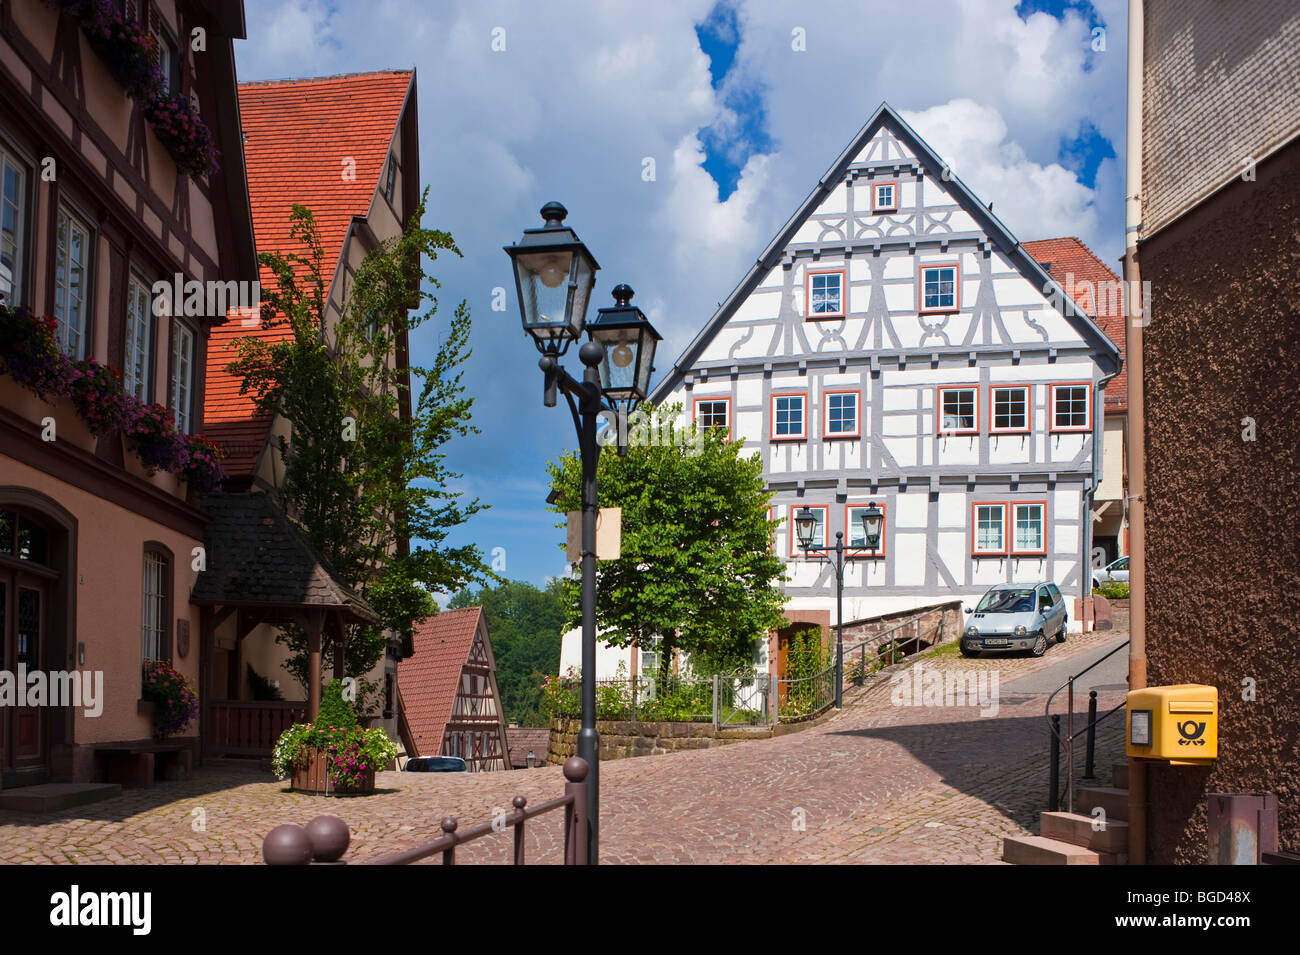 City treasury, citizens and craftsmen house, Altensteig, Black Forest, Baden-Wuerttemberg, Germany, Europe Stock Photo